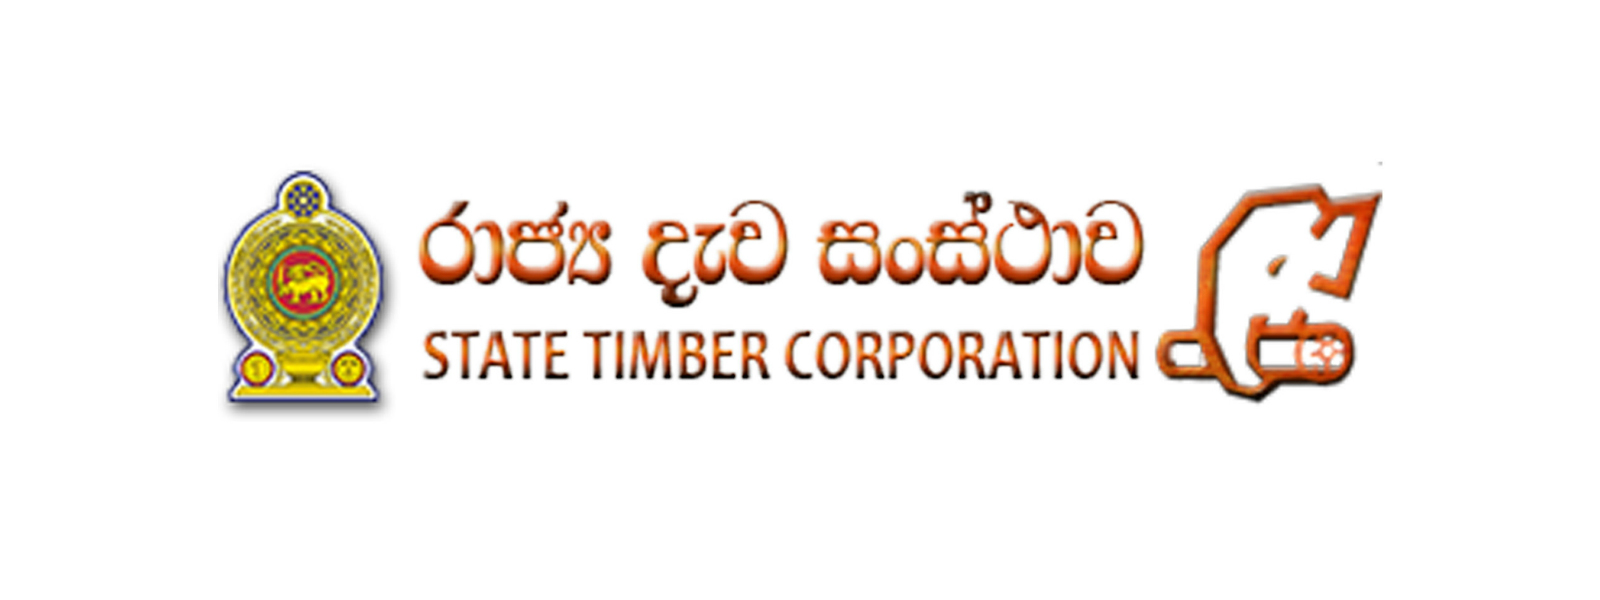 New chairman appointed to State Timber Corporation